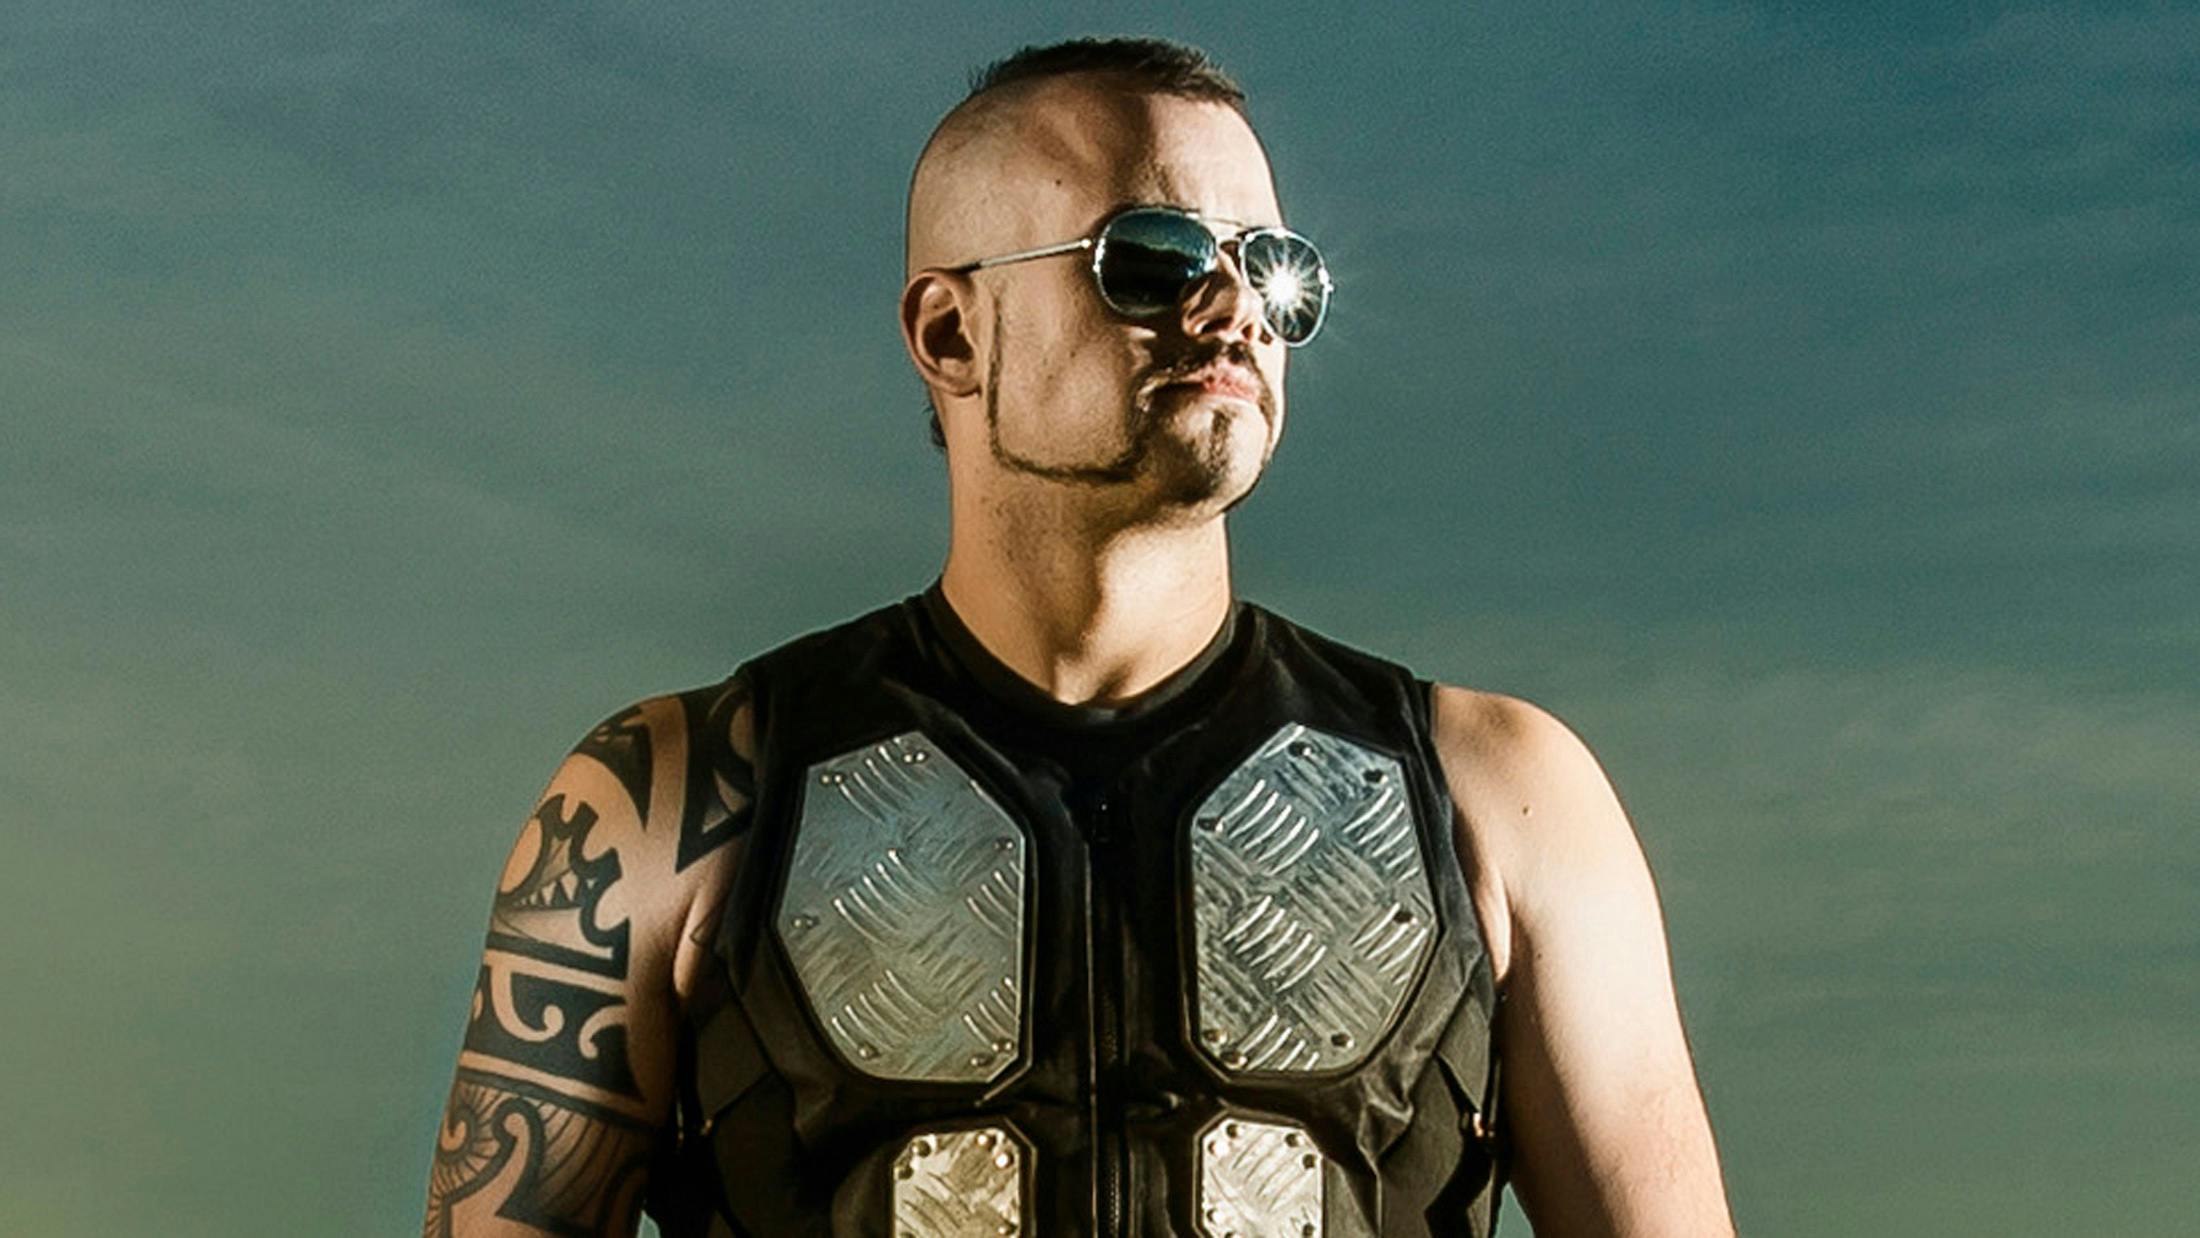 "I Wanted To Be A Fighter Pilot": 13 Questions With Sabaton's Joakim Brodén